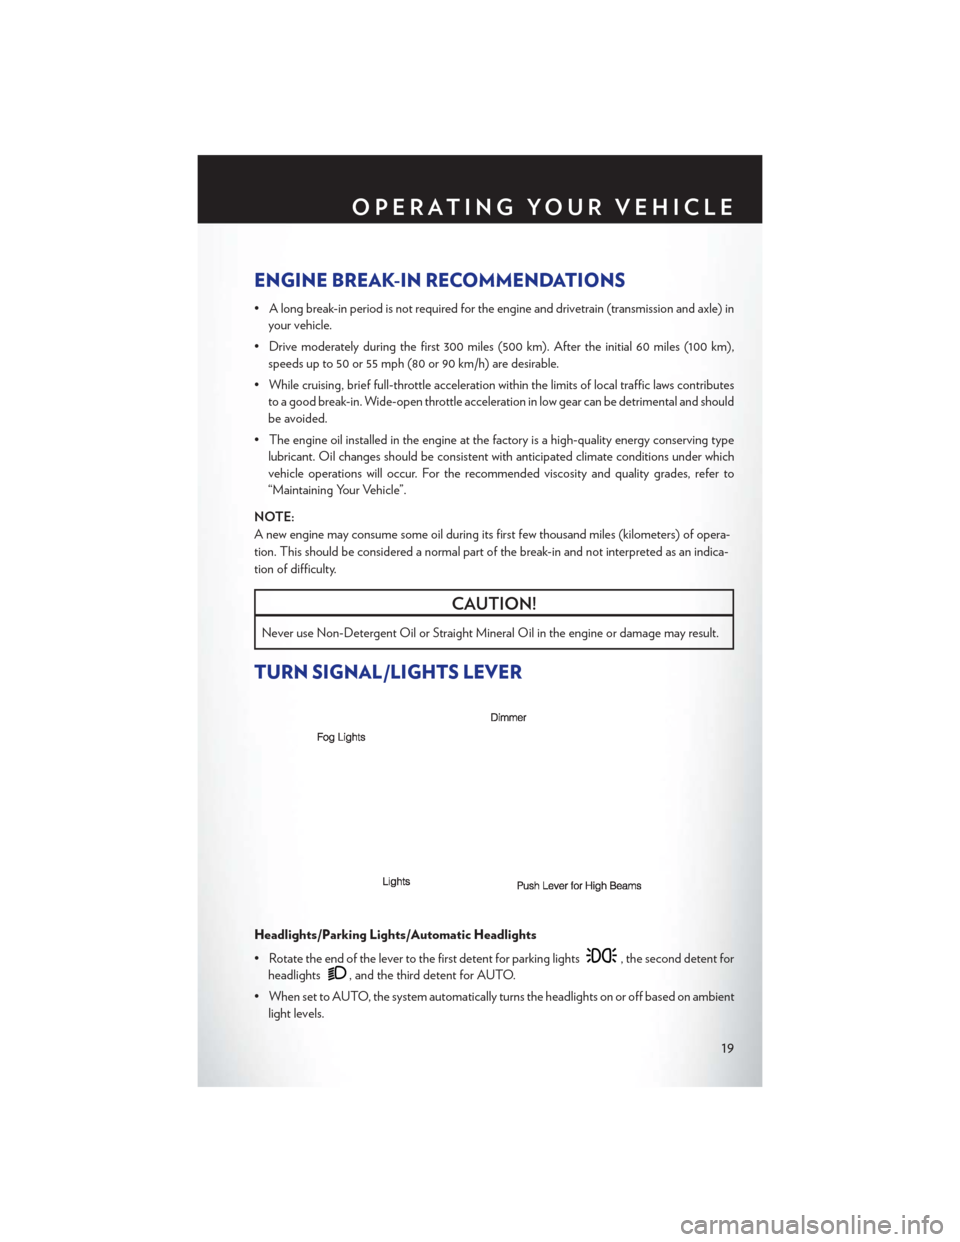 CHRYSLER 200 CONVERTIBLE 2013 1.G User Guide ENGINE BREAK-IN RECOMMENDATIONS
• A long break-in period is not required for the engine and drivetrain (transmission and axle) inyour vehicle.
• Drive moderately during the first 300 miles (500 km